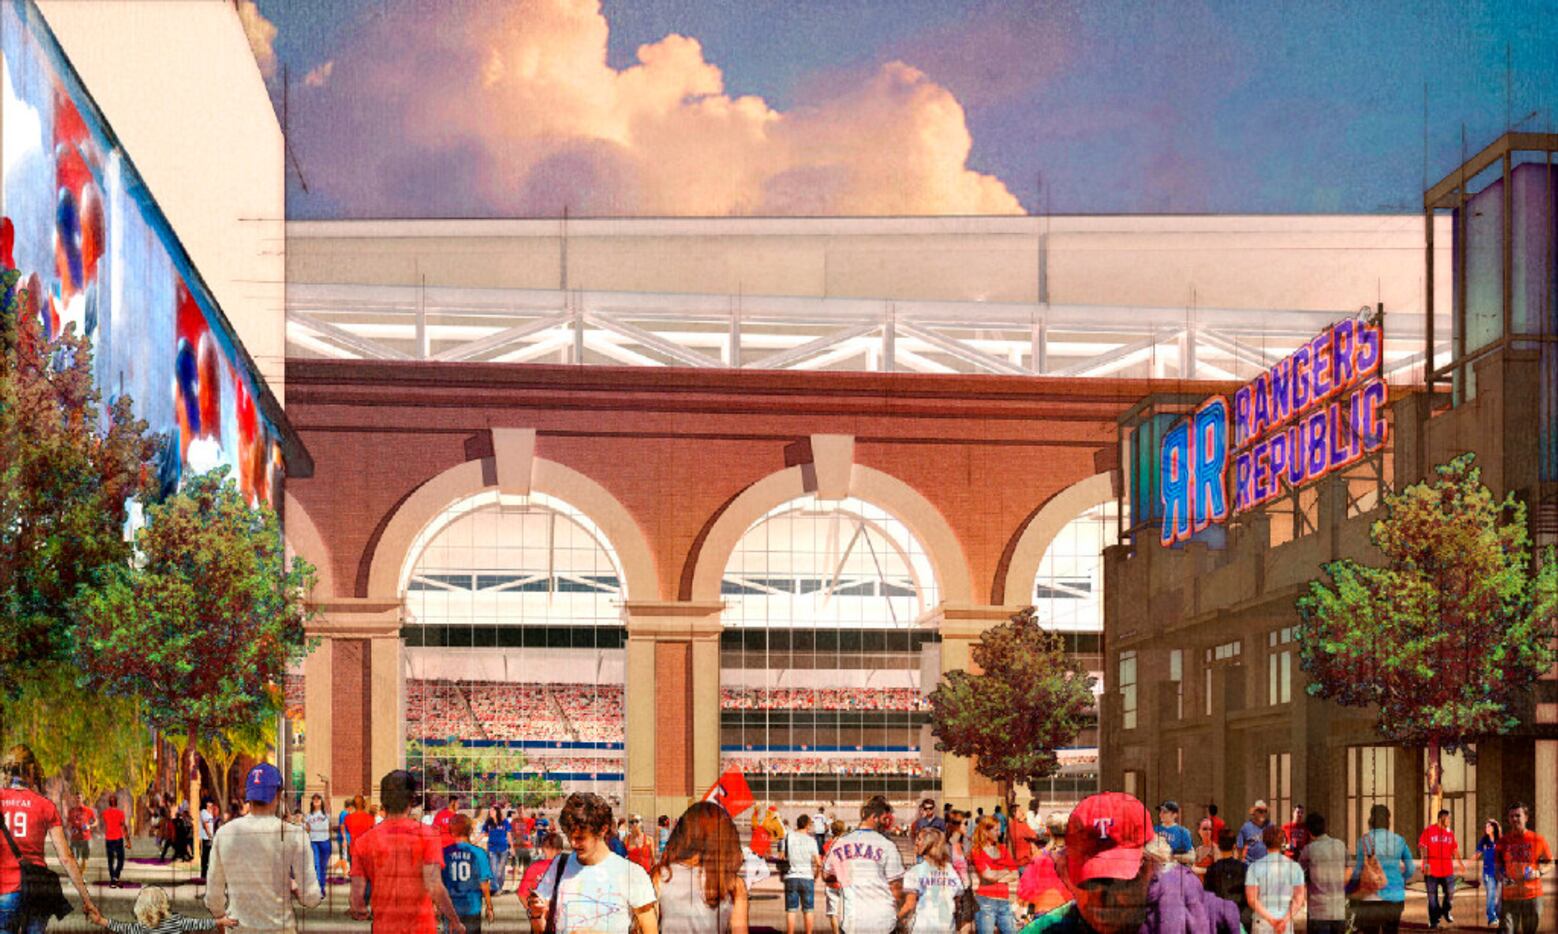 A rendering from architecture firm HKS showing what the new Texas Rangers ballpark might...